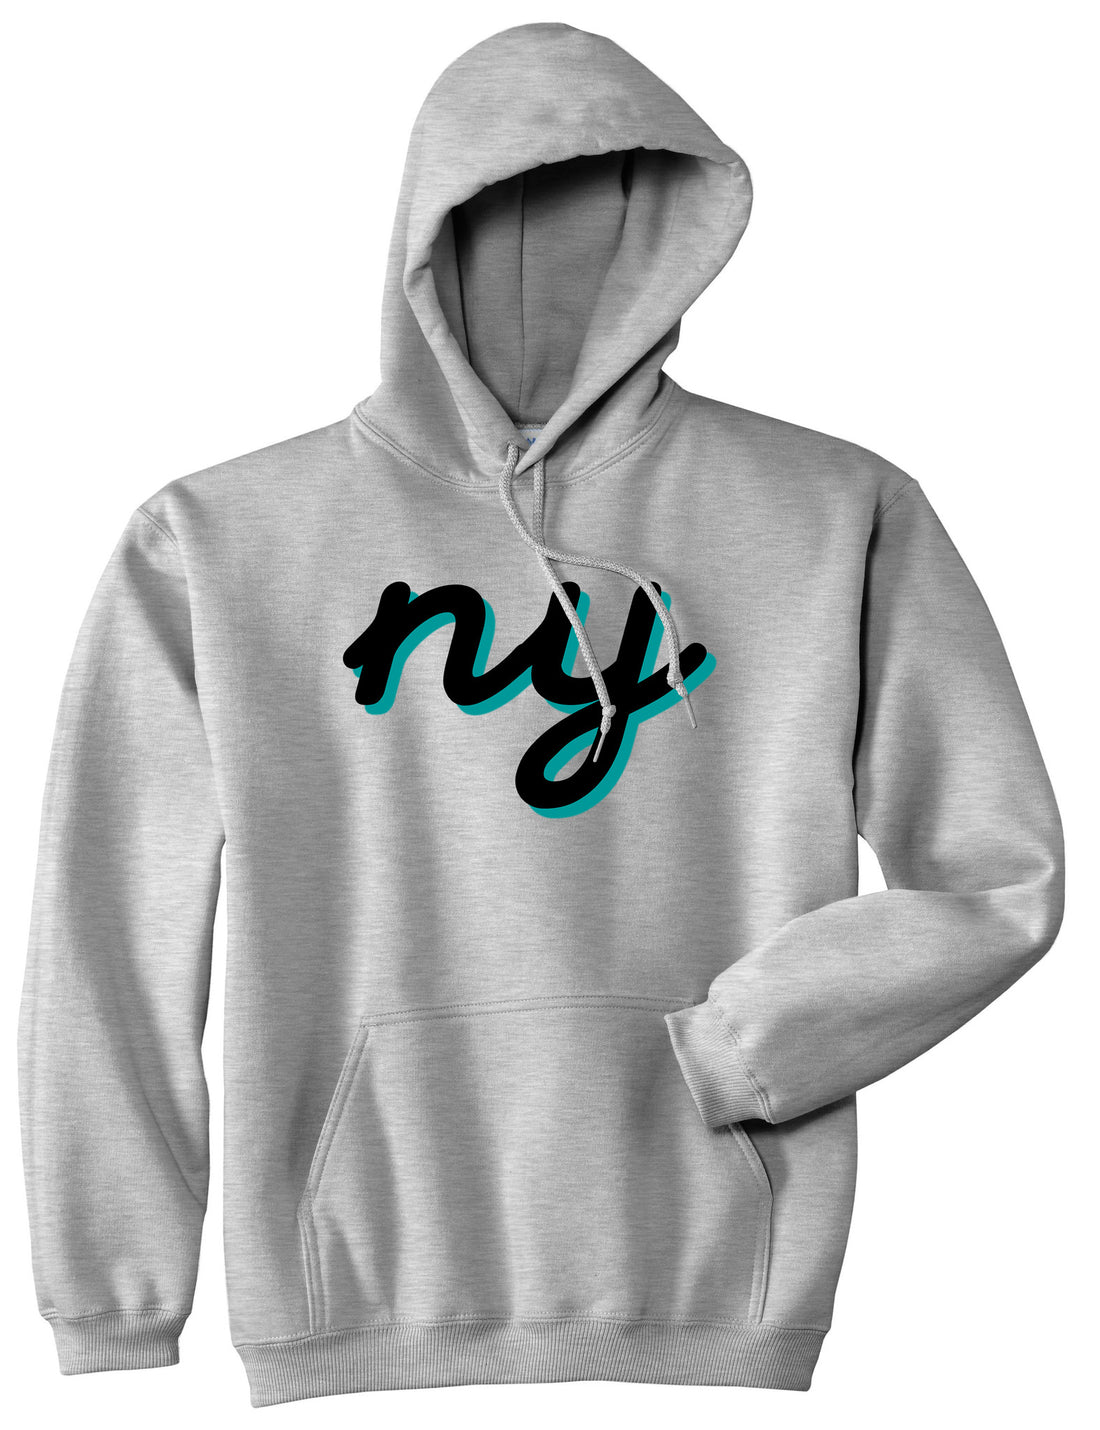 NY lower case script Pullover Hoodie in Grey